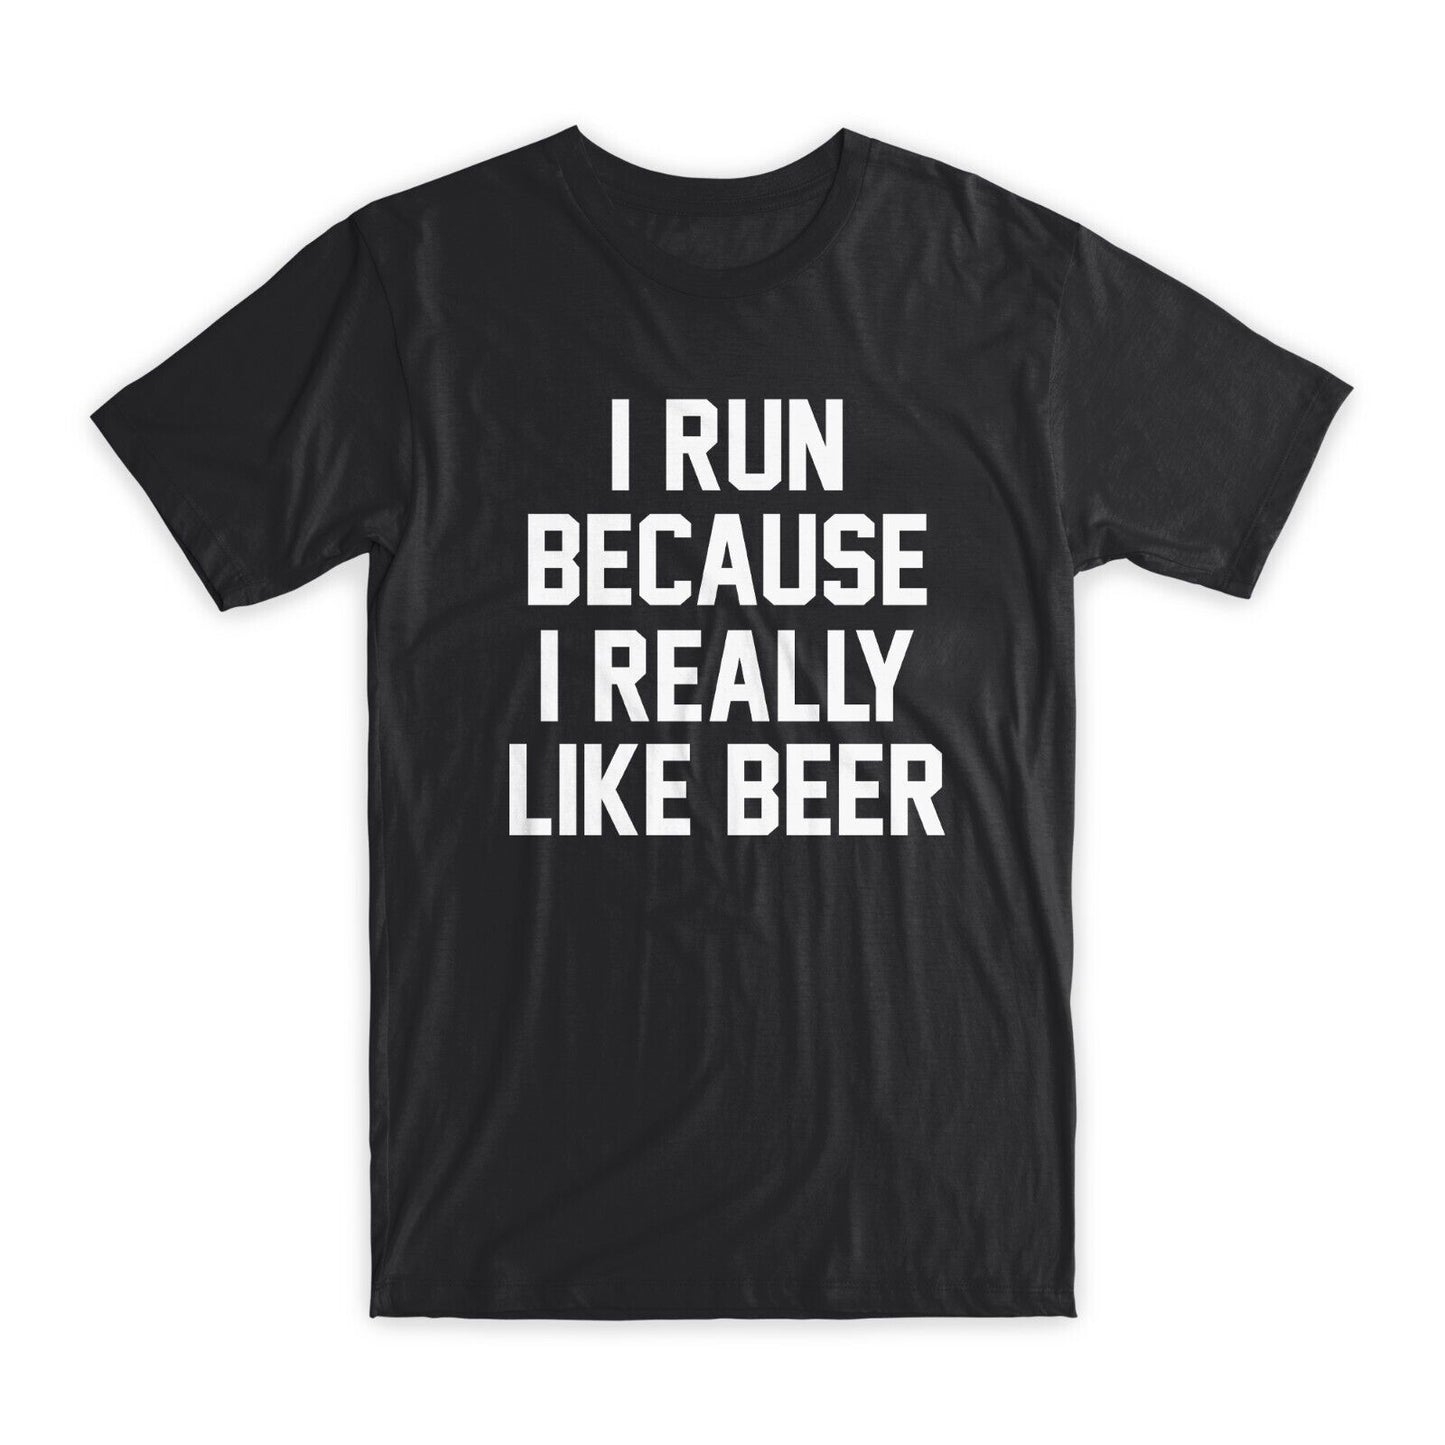 I Run Because I Really Like Beer T-Shirt Premium Soft Cotton Funny Tees Gift NEW